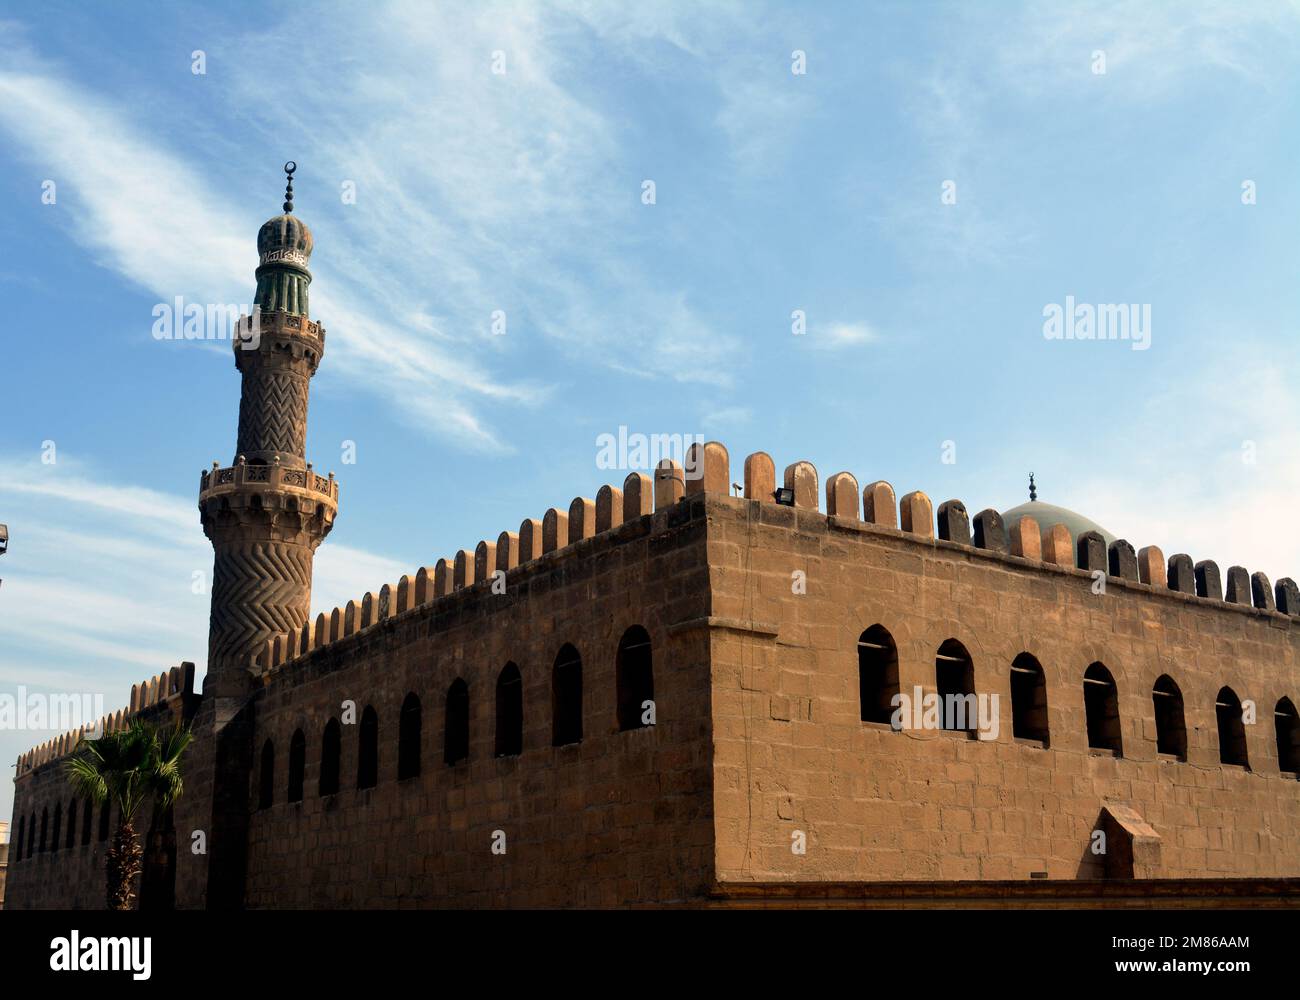 The Sultan Al-Nasir Muhammad ibn Qalawun Mosque, an early 14th-century mosque at the Citadel in Cairo, Egypt built by the Mamluk sultan Al-Nasr Muhamm Stock Photo